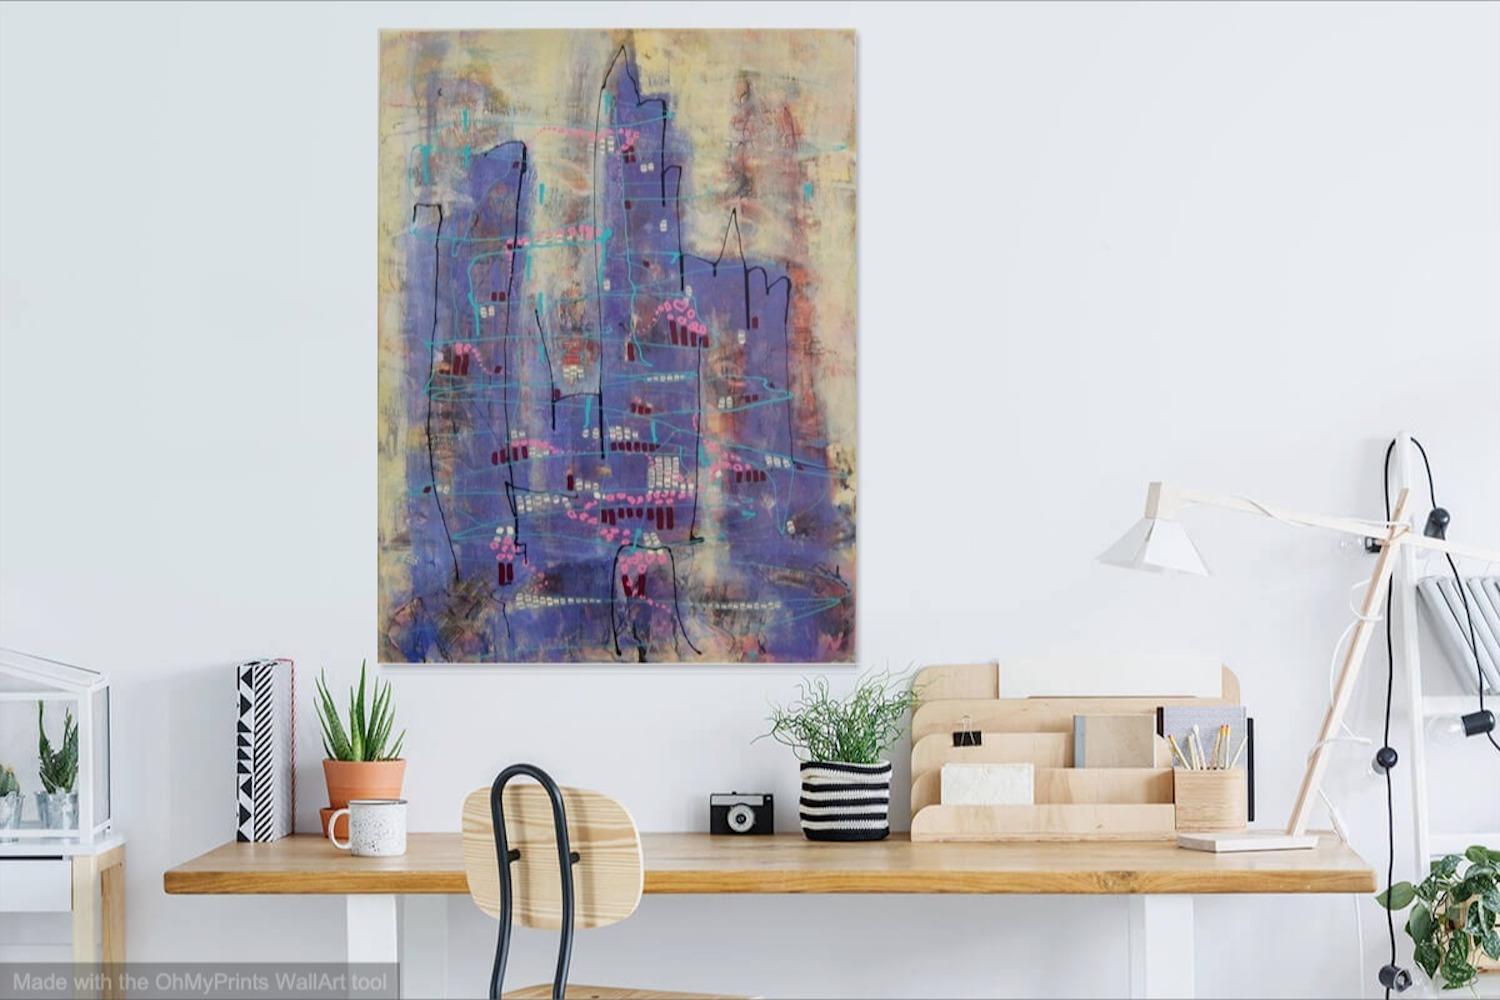 Whimsical Metropolis - Original Abstract Painting on Canvas - Surreal Art for Home Decor - Fantasy City Mood - Unique Cityscape - Blue Art